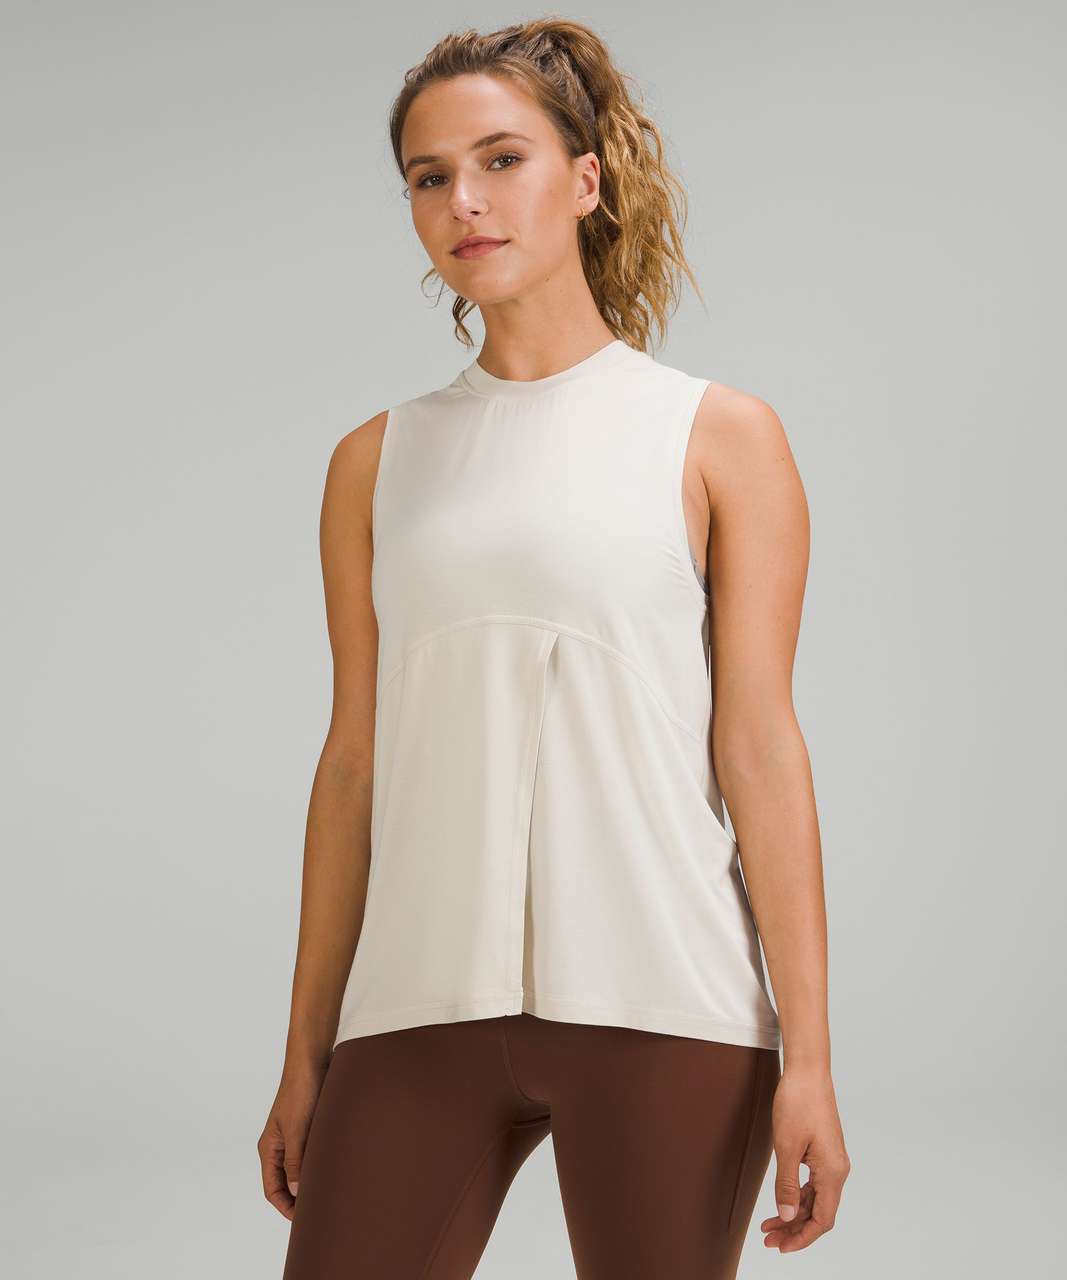 White Tank Top - Tie-Strap Top - Tiered Top - Woven Tank Top - Lulus